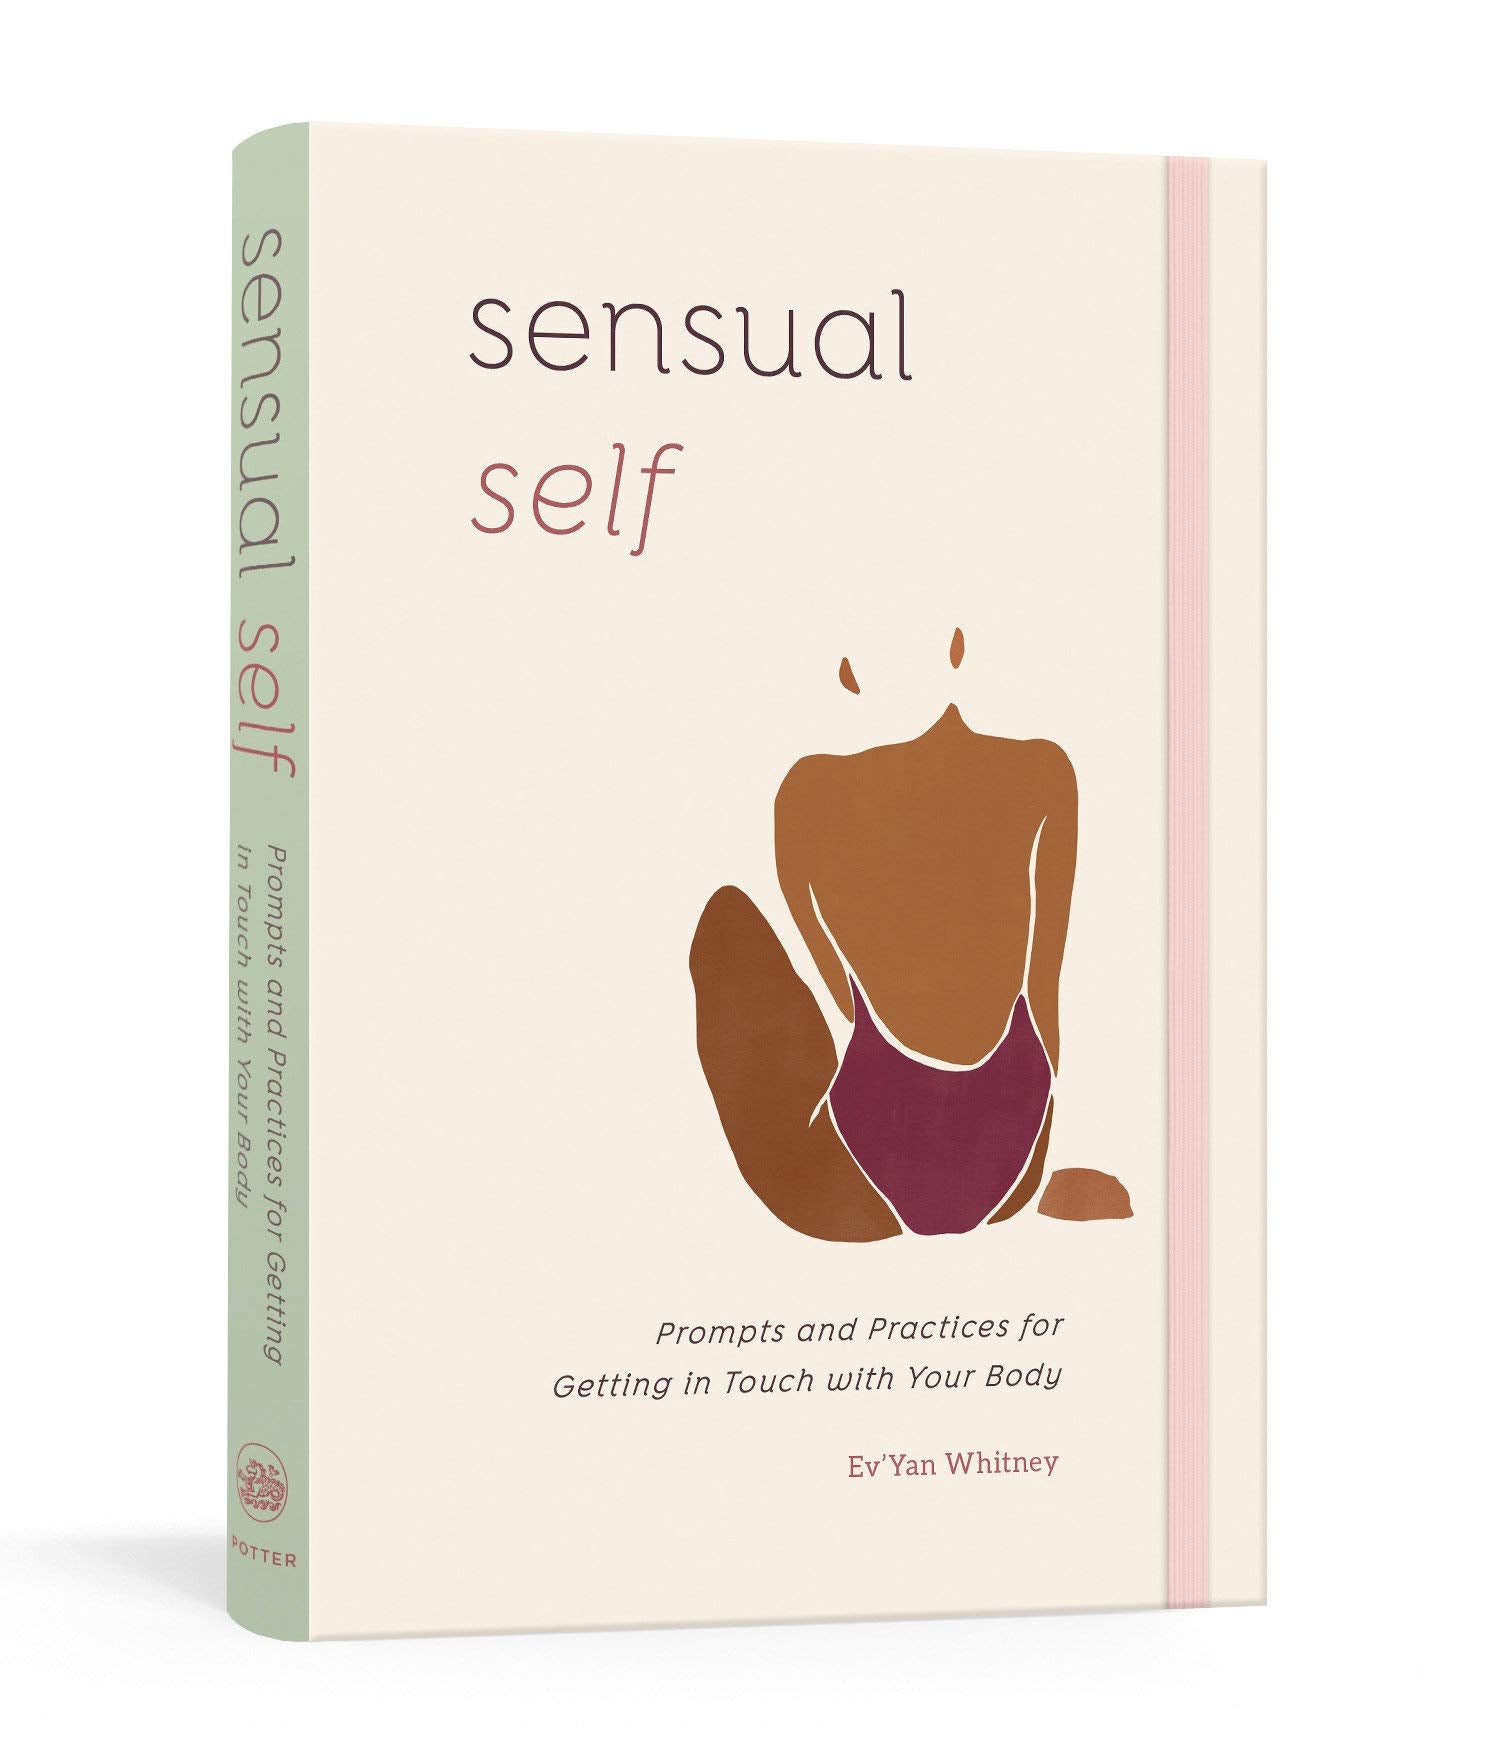 Sensual Self: Prompts and Practices for Getting in Touch with Your Body: A Guided Journal - Spiral Circle